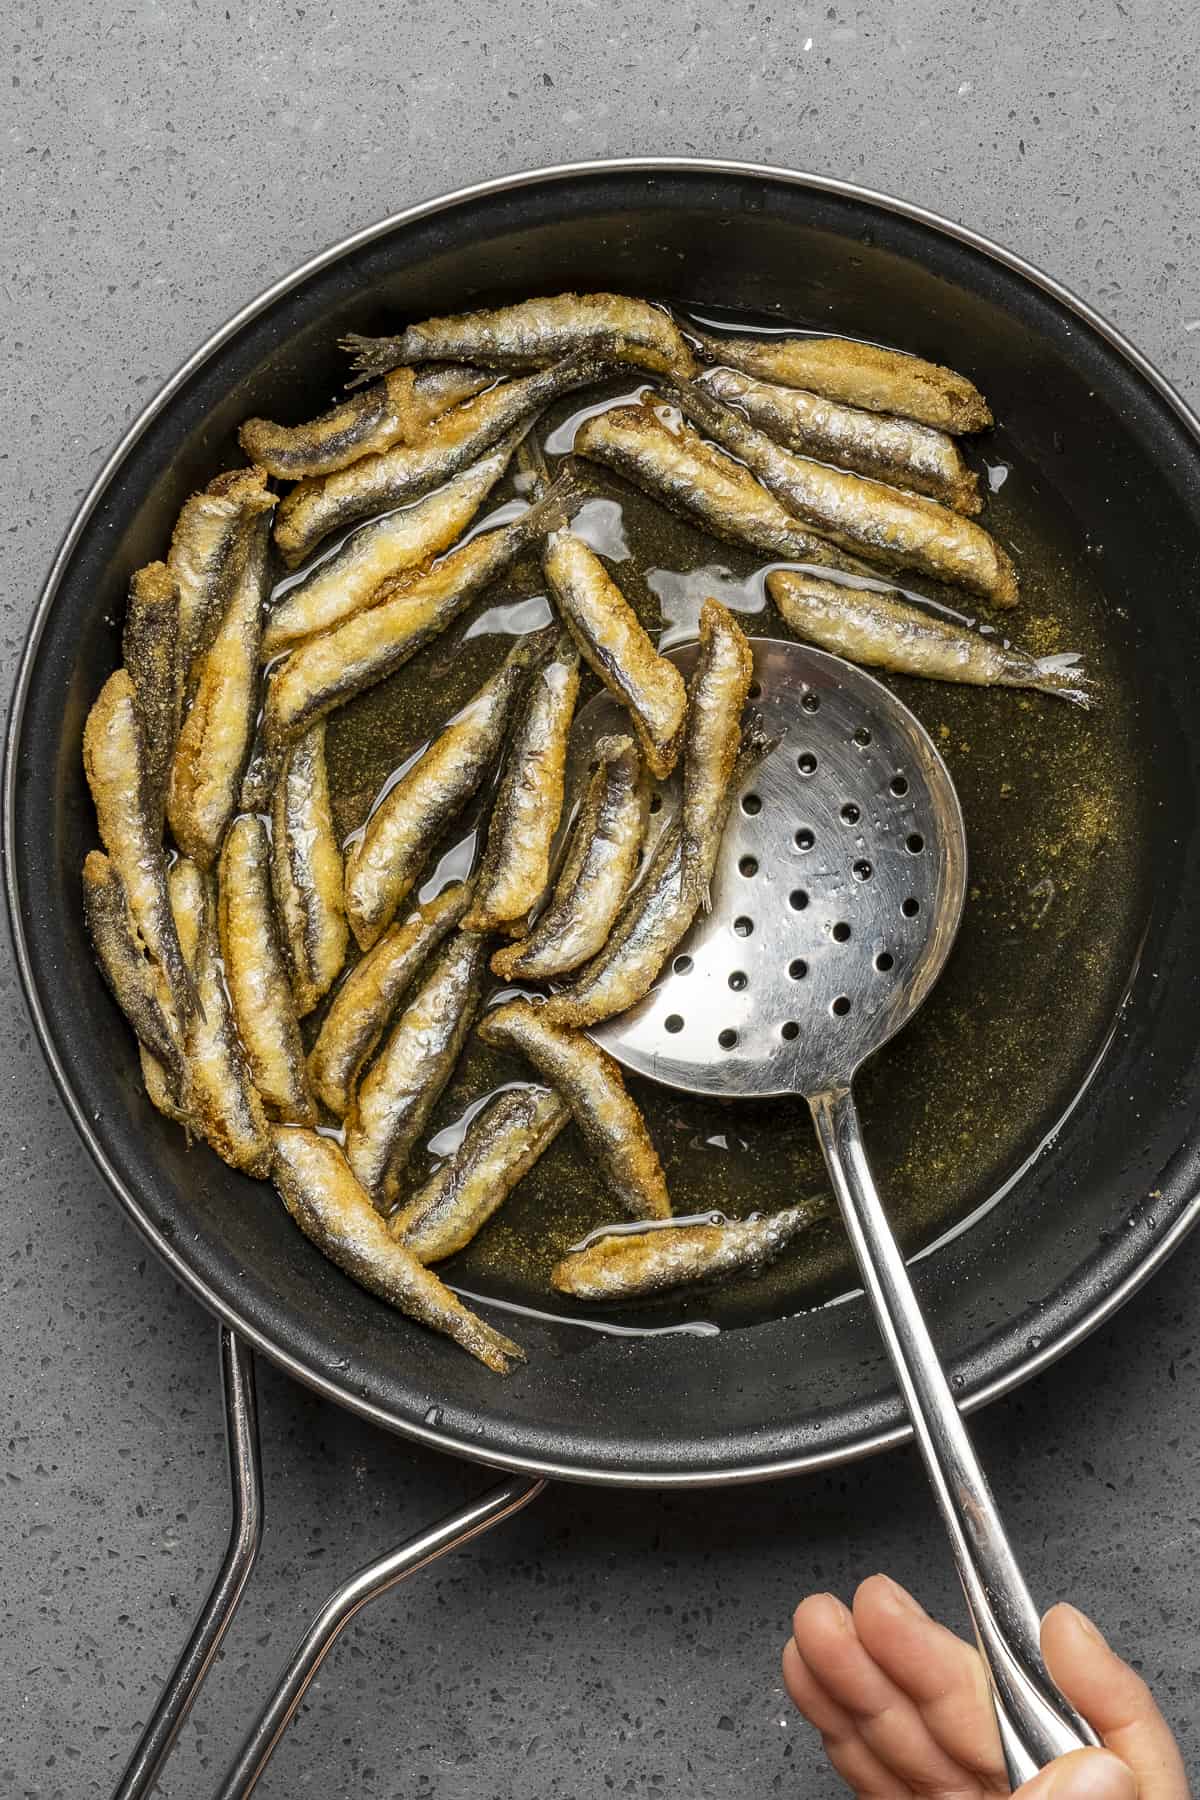 Hand removing fried anchovies from a frying pan with a slotted spoon.